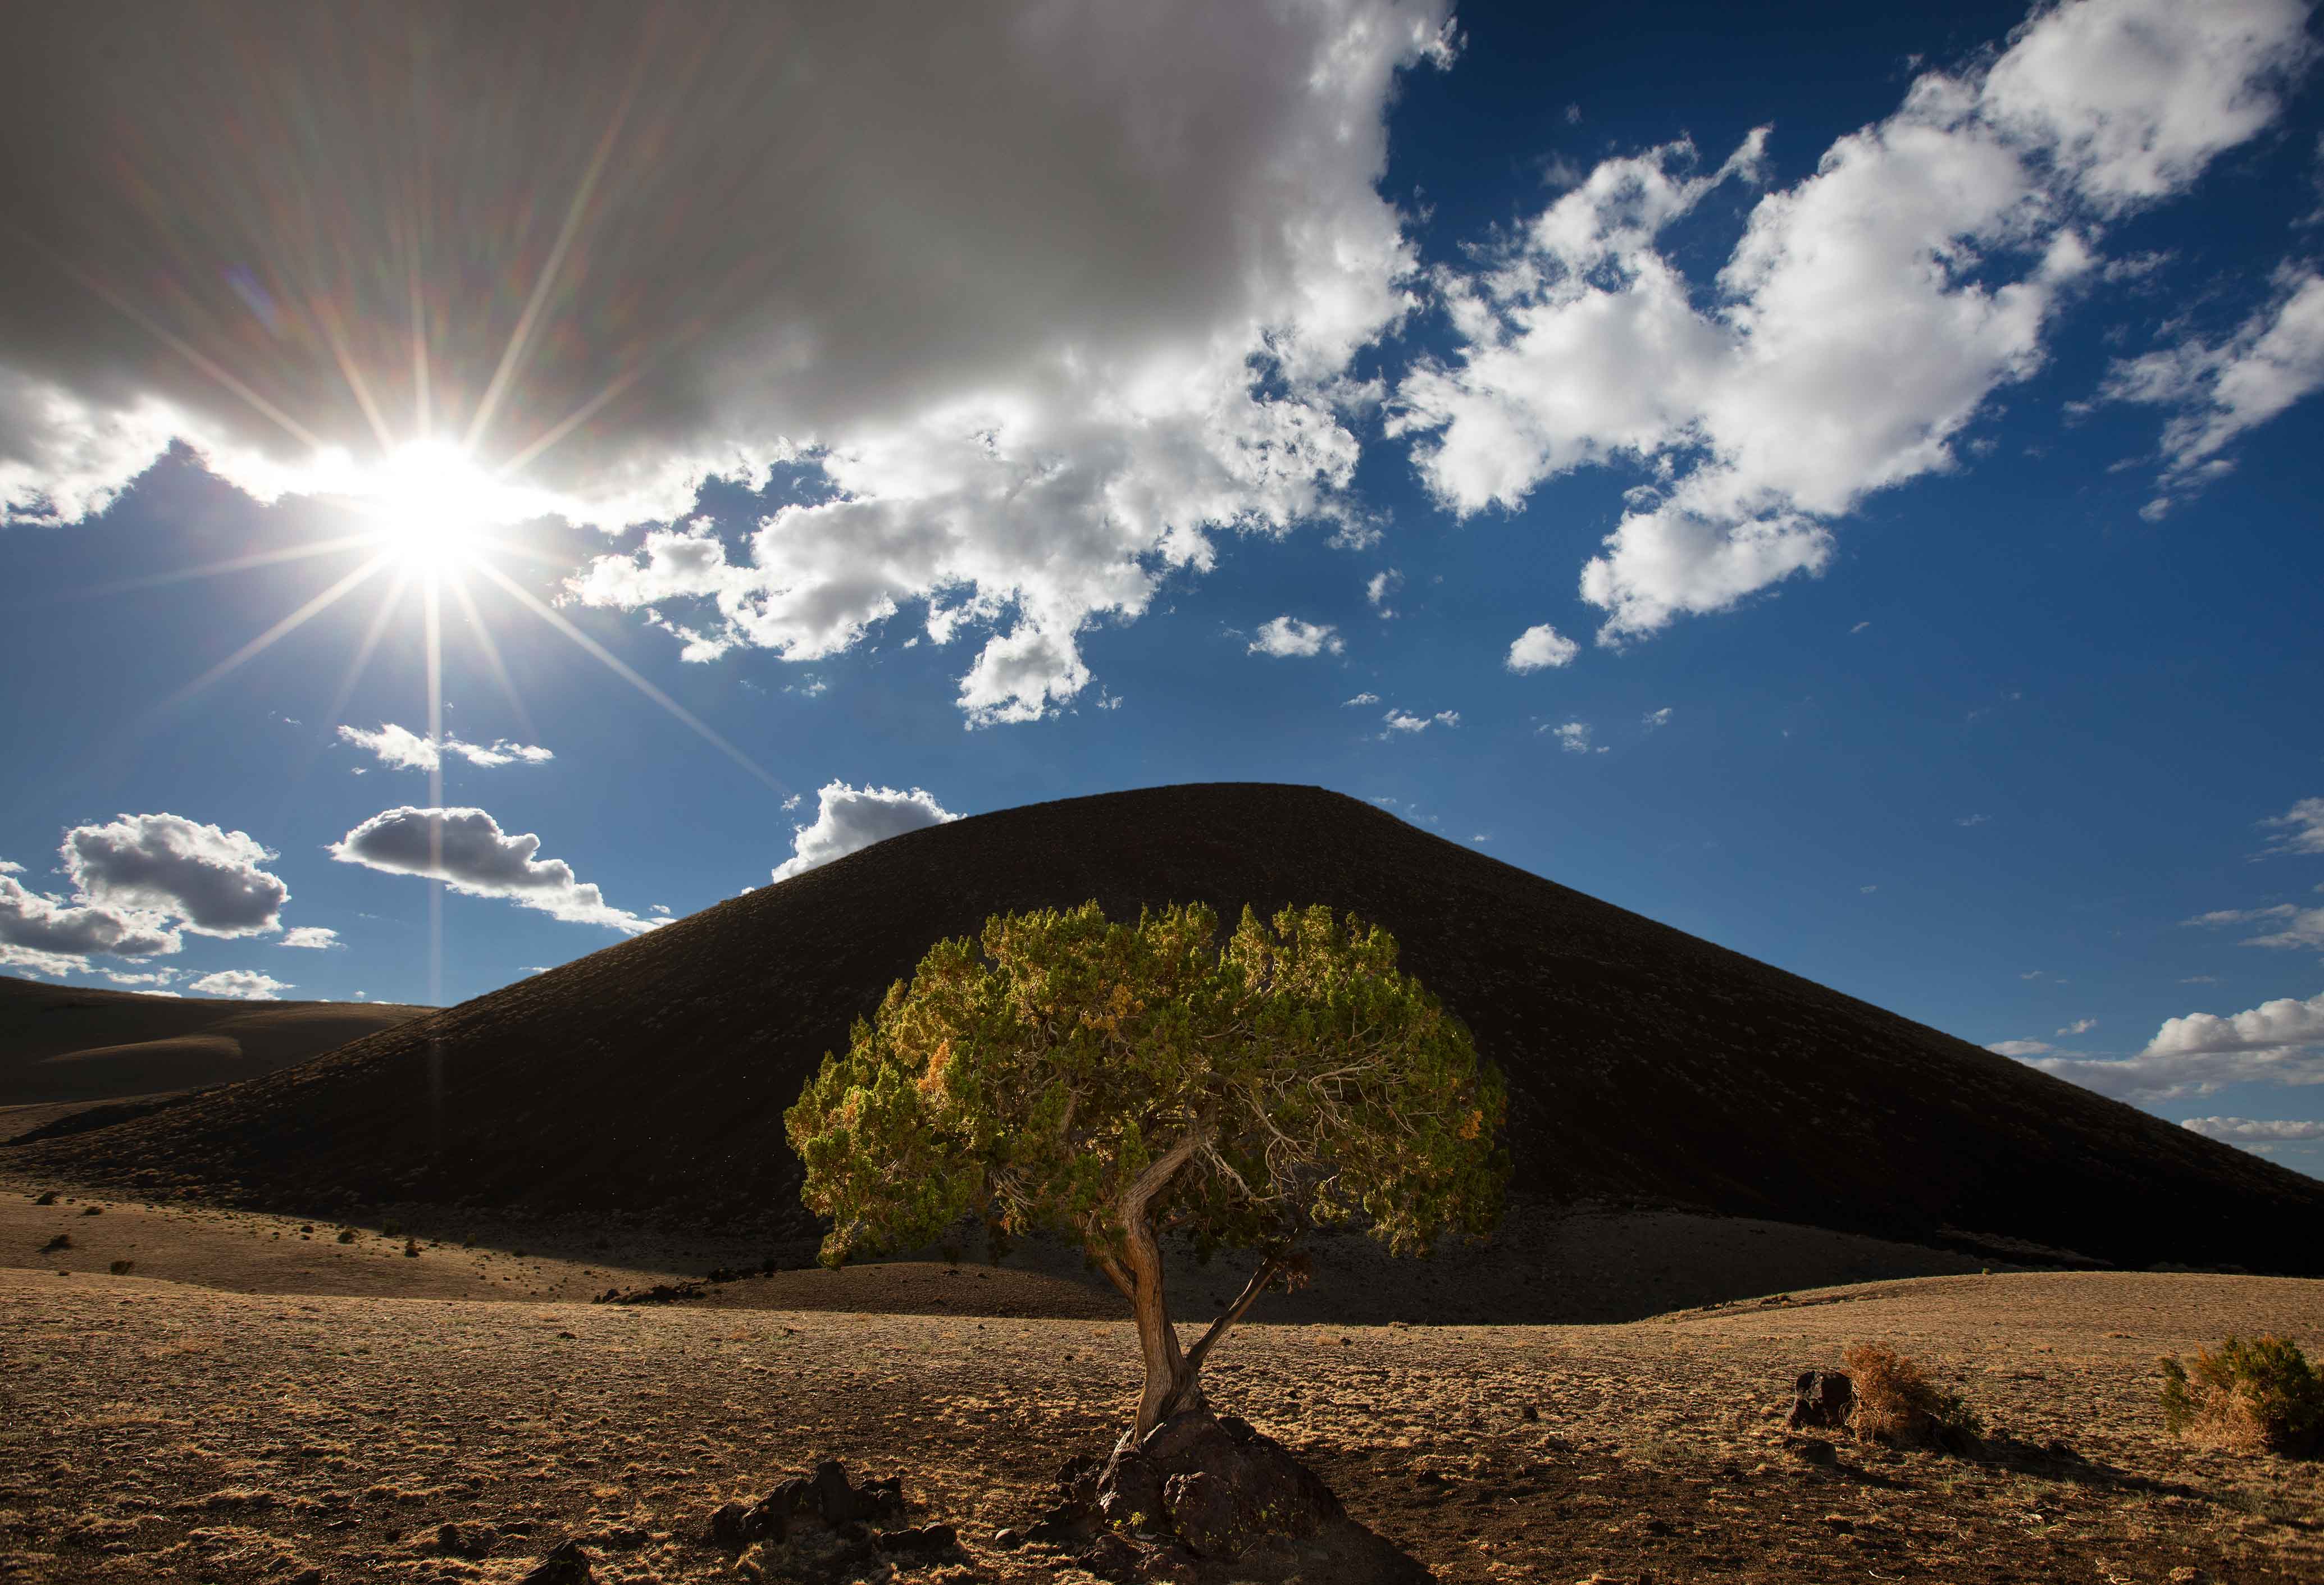 A juniper tree is shrouded by SP Crater, a cinder cone (dormant volcano) in northern Arizona